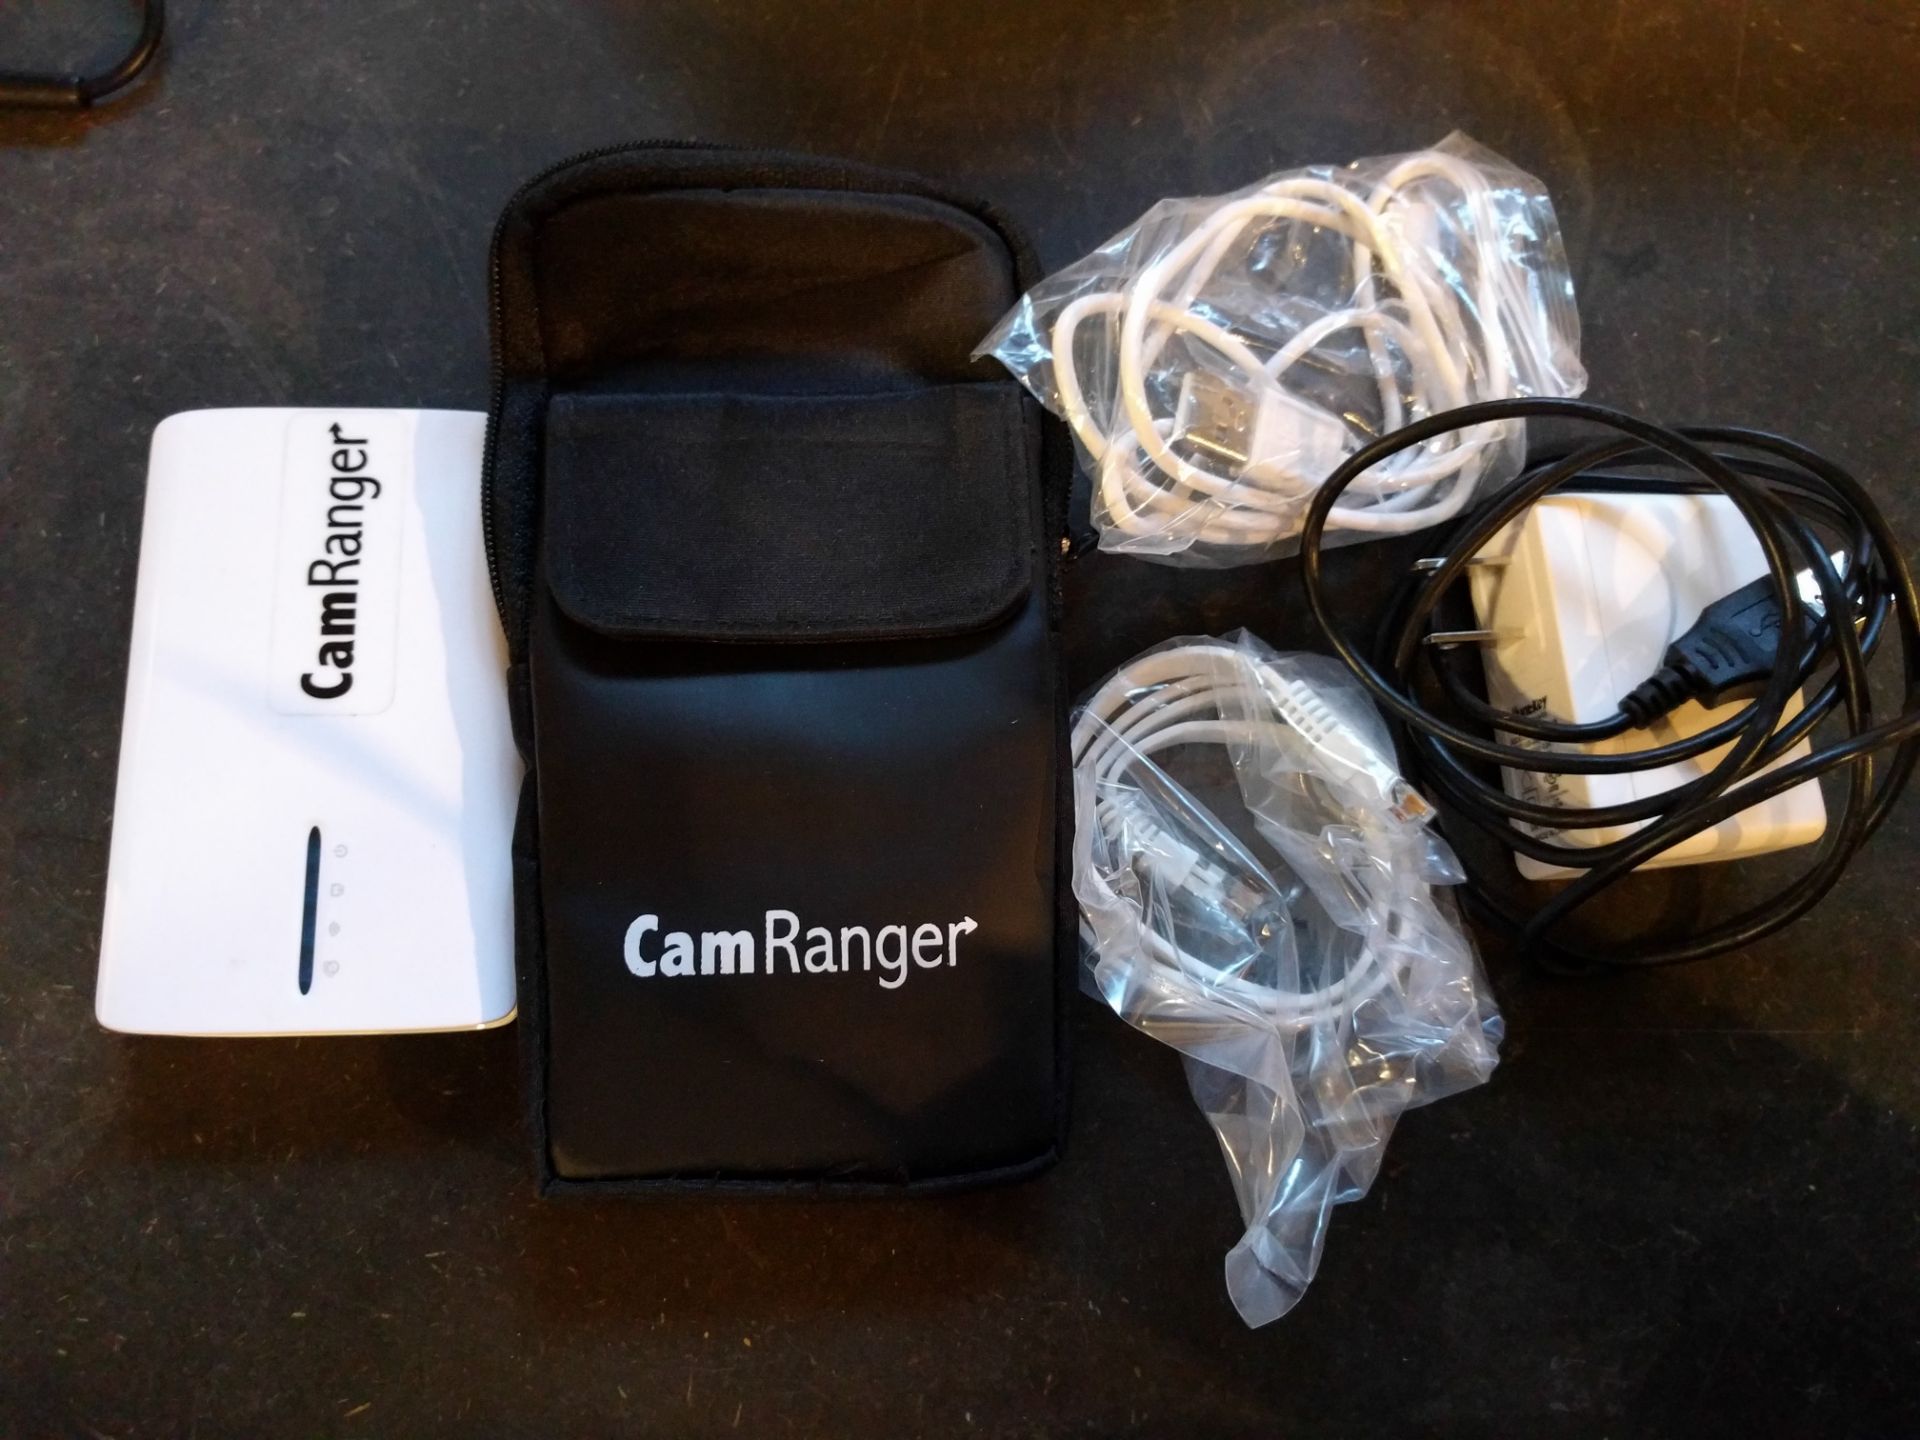 Cam recorder Device to transmit data wireless from DSLR - Quantity 3 Condition used - RPR £ 268 each